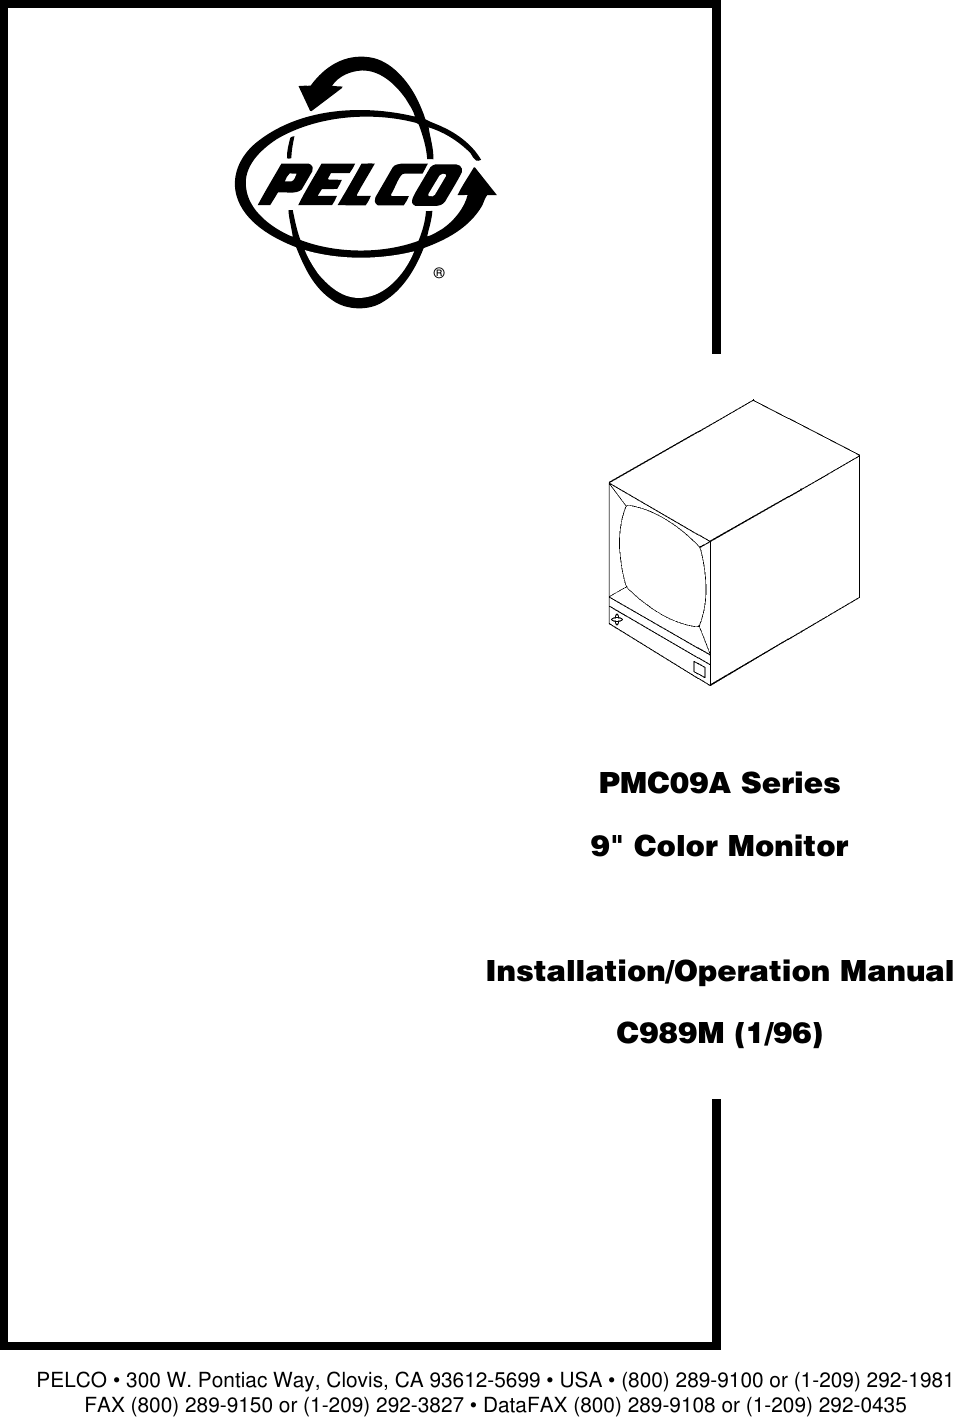 Page 1 of 8 - Pelco Pelco-9-Color-Monitor-Pmc09A-Series-Users-Manual--5  Pelco-9-color-monitor-pmc09a-series-users-manual